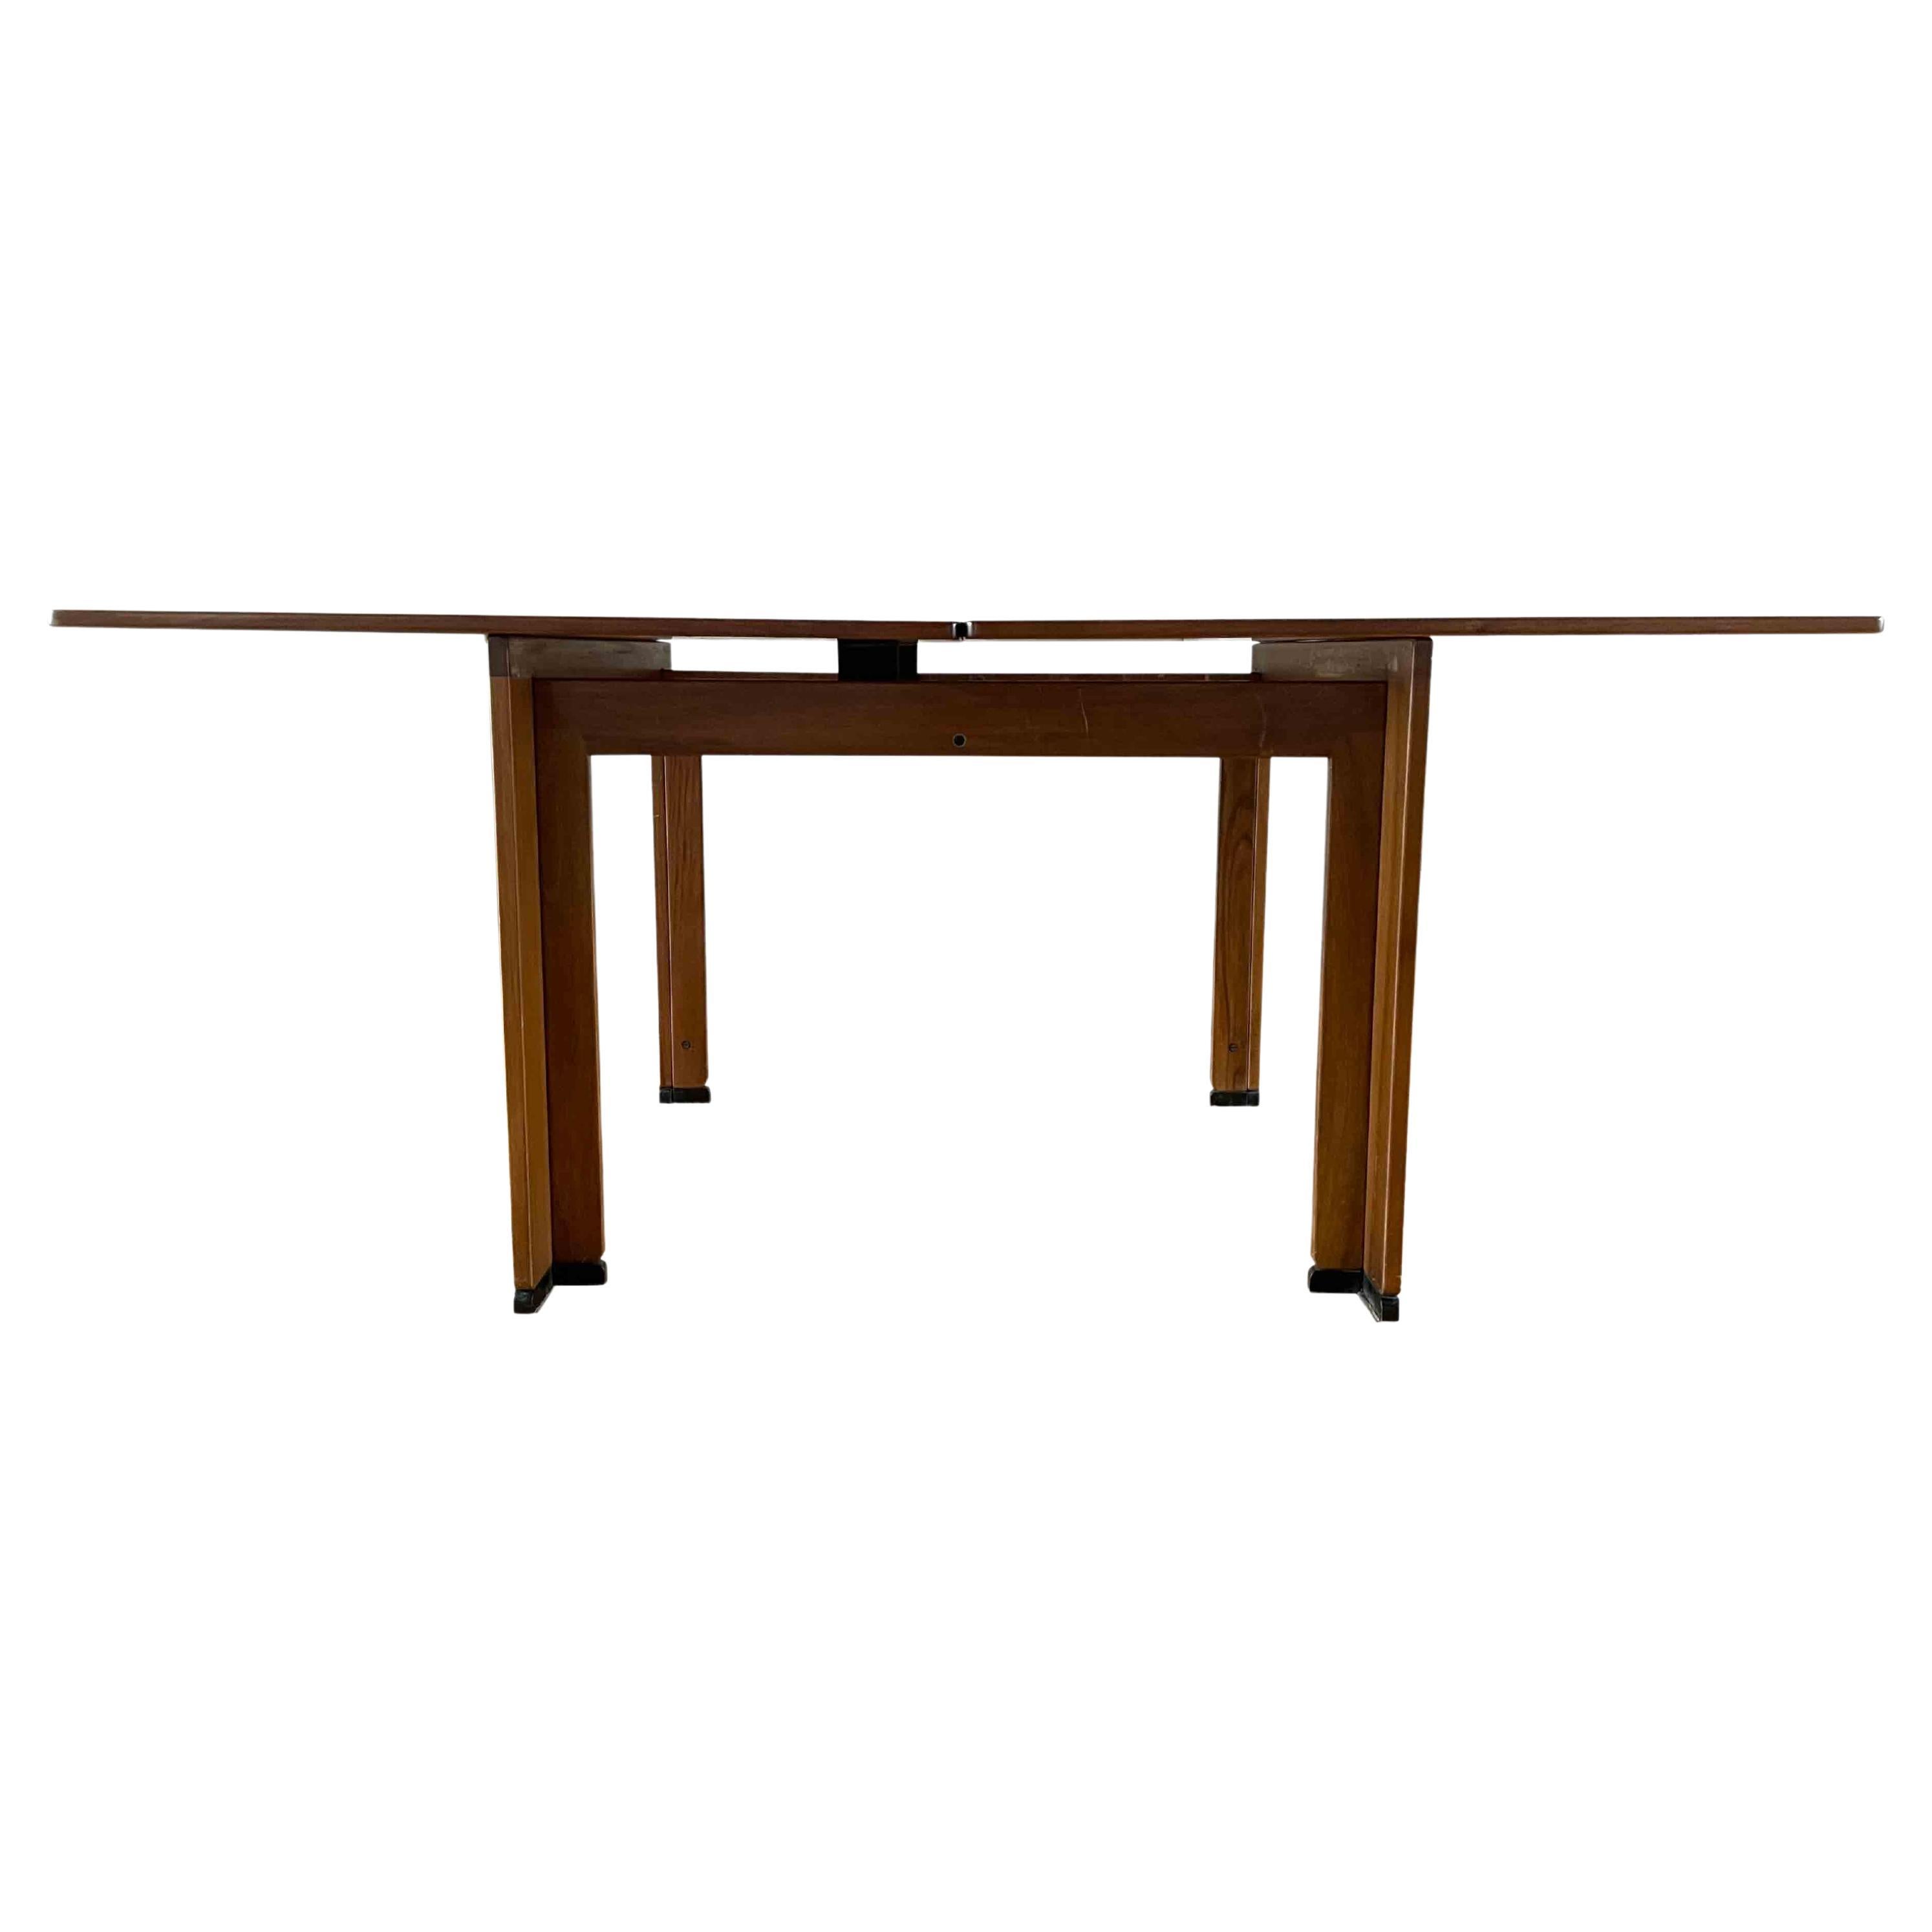 Afra & Tobia Scarpa Midcentury “778” Extensible Dining Table for Cassina, 1967 For Sale